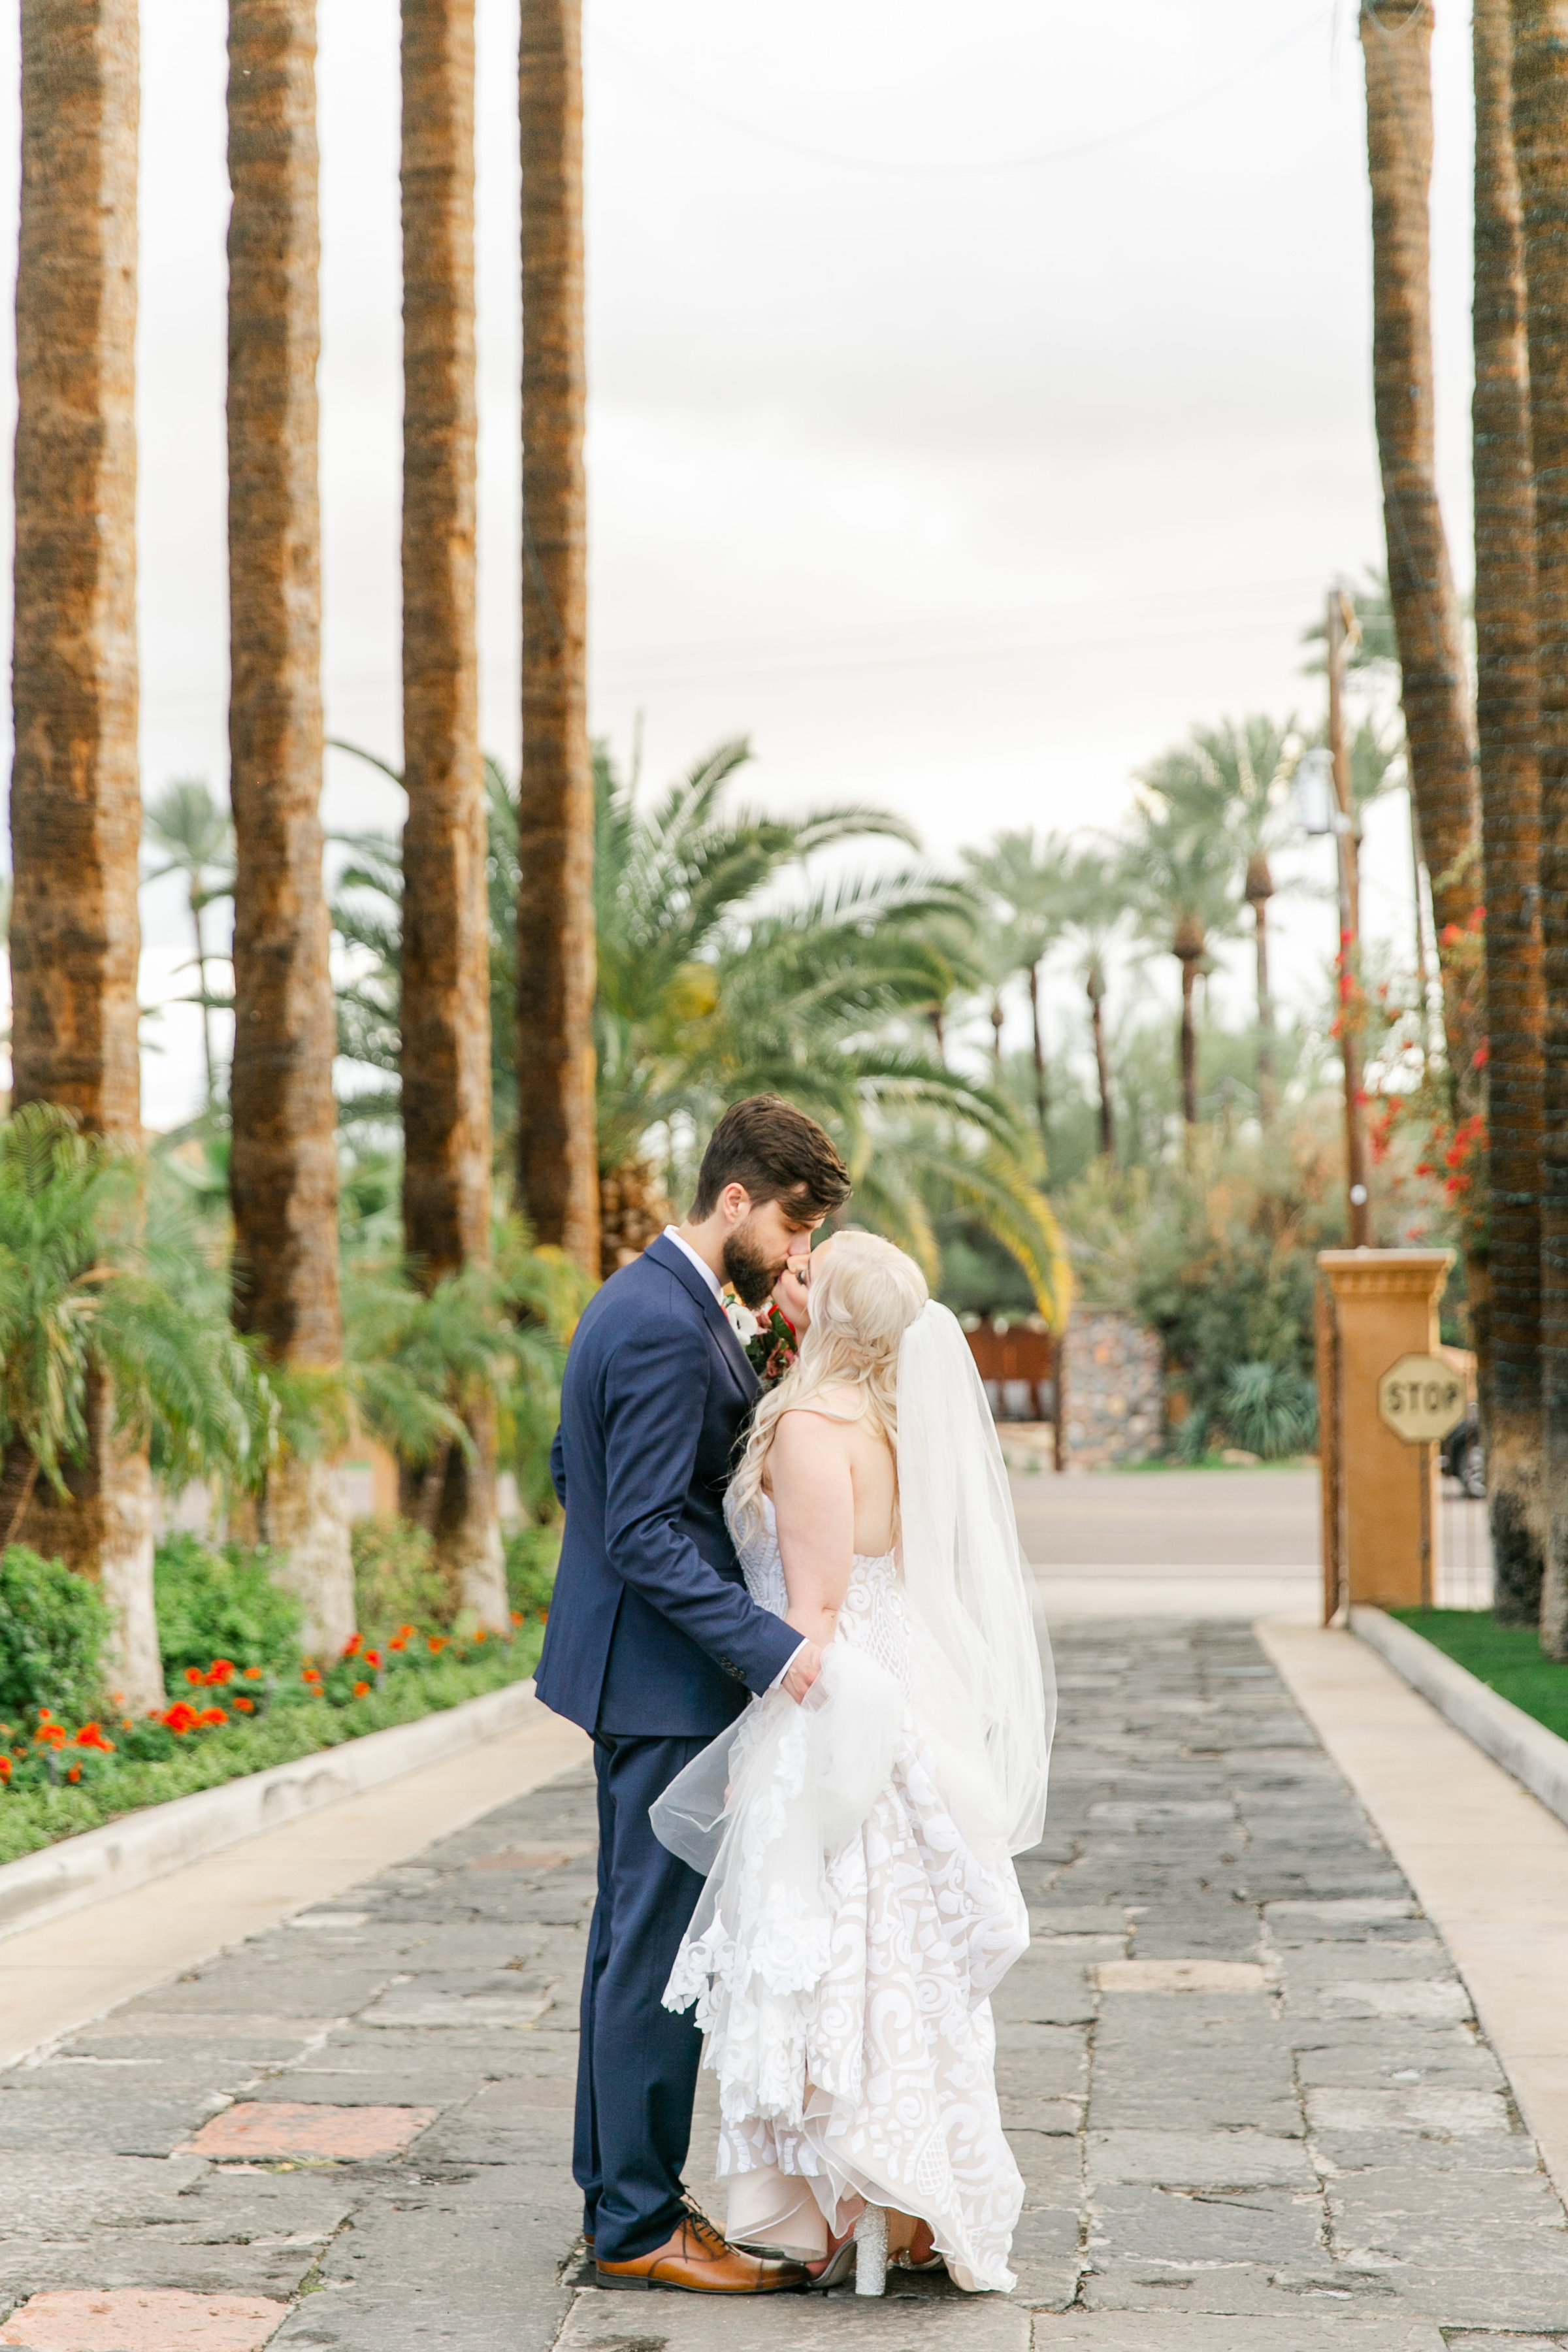 Karlie Colleen Photography - The Royal Palms Wedding - Some Like It Classic - Alex & Sam-577